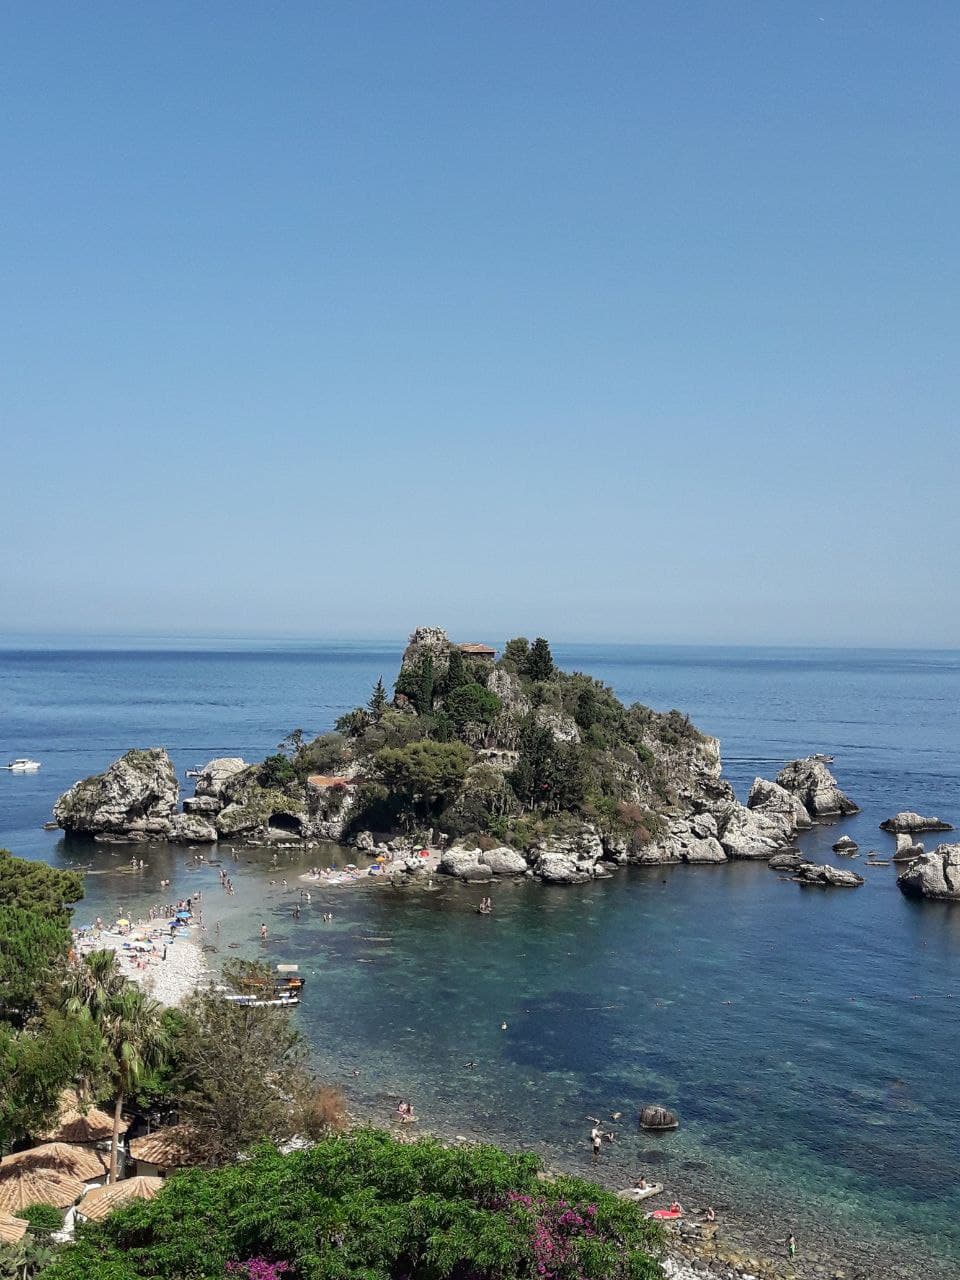 How to get to Isola Bella